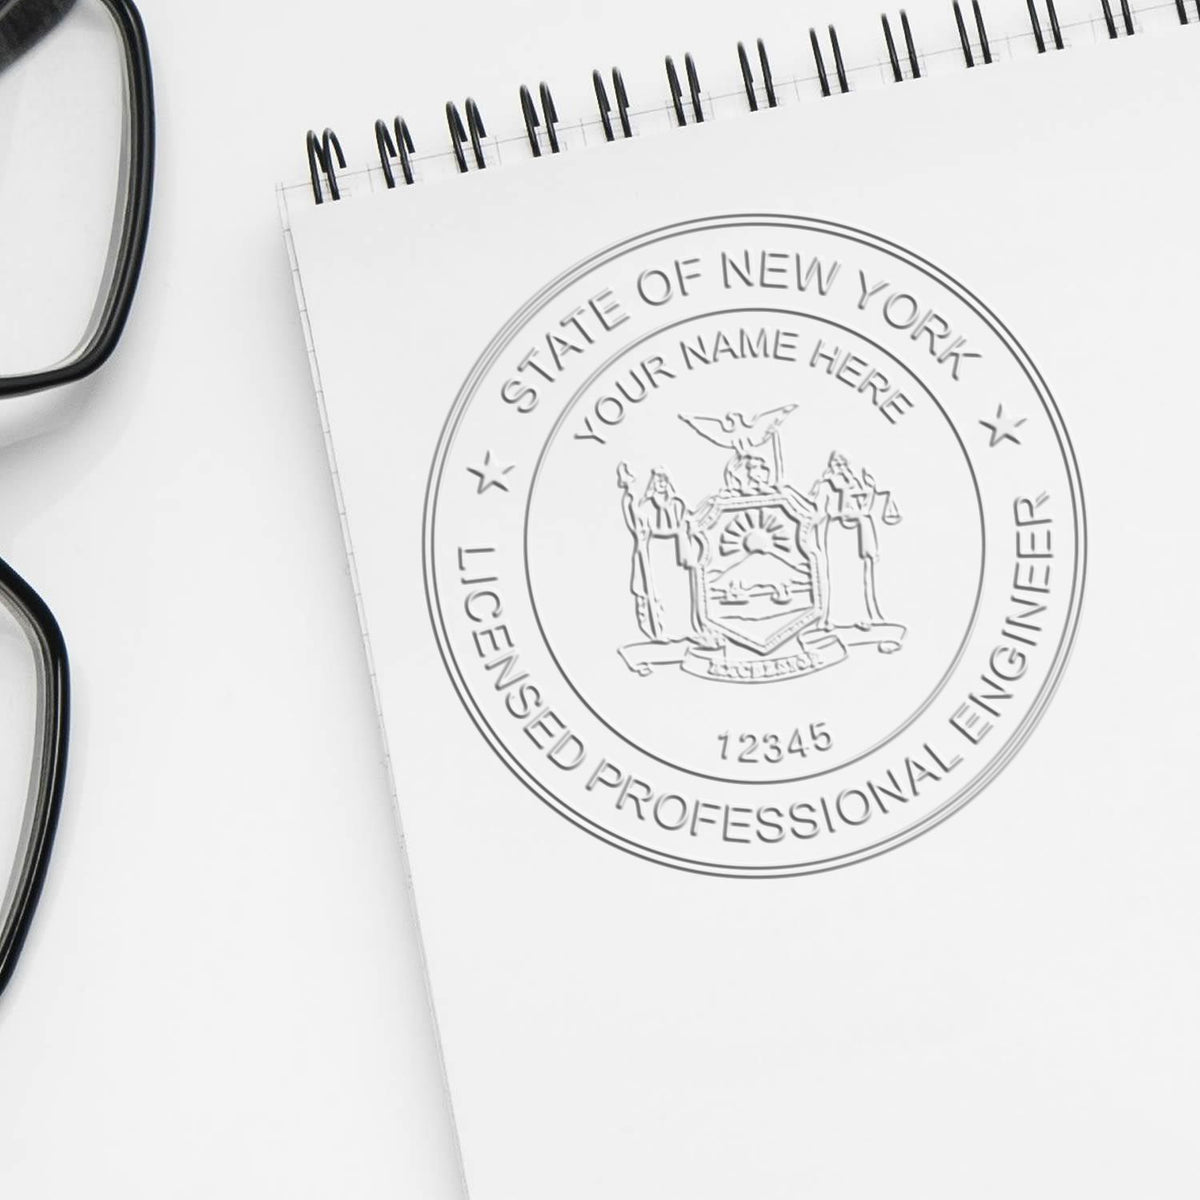 A photograph of the Hybrid New York Engineer Seal stamp impression reveals a vivid, professional image of the on paper.